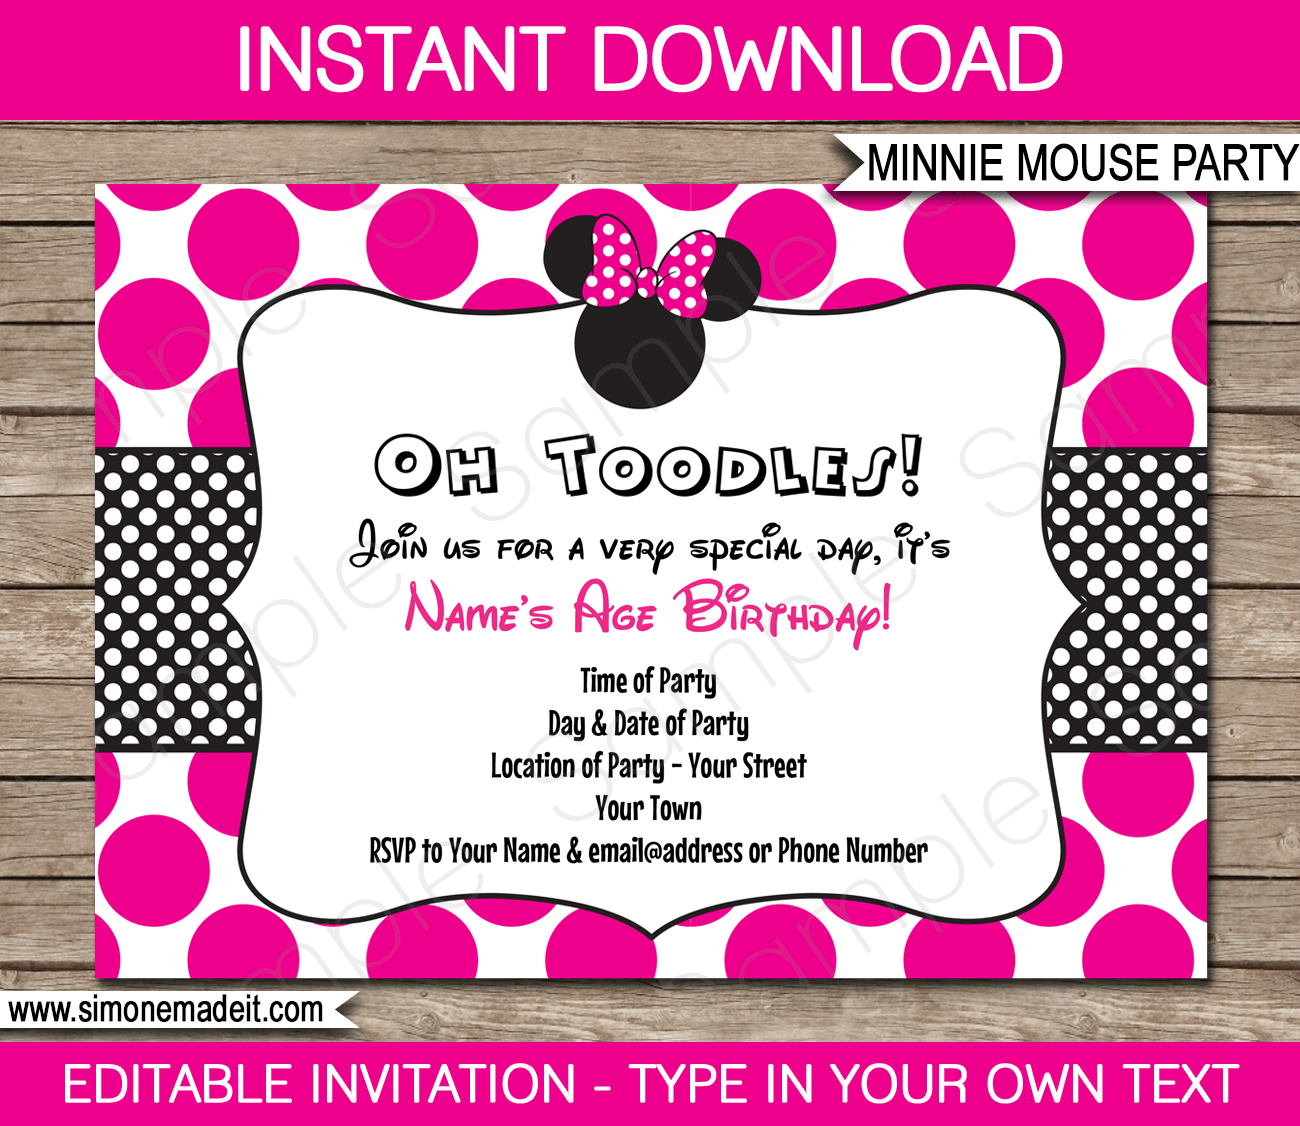 Minnie Mouse Party Invitations Template | Birthday Party - Free Printable Minnie Mouse Invitations